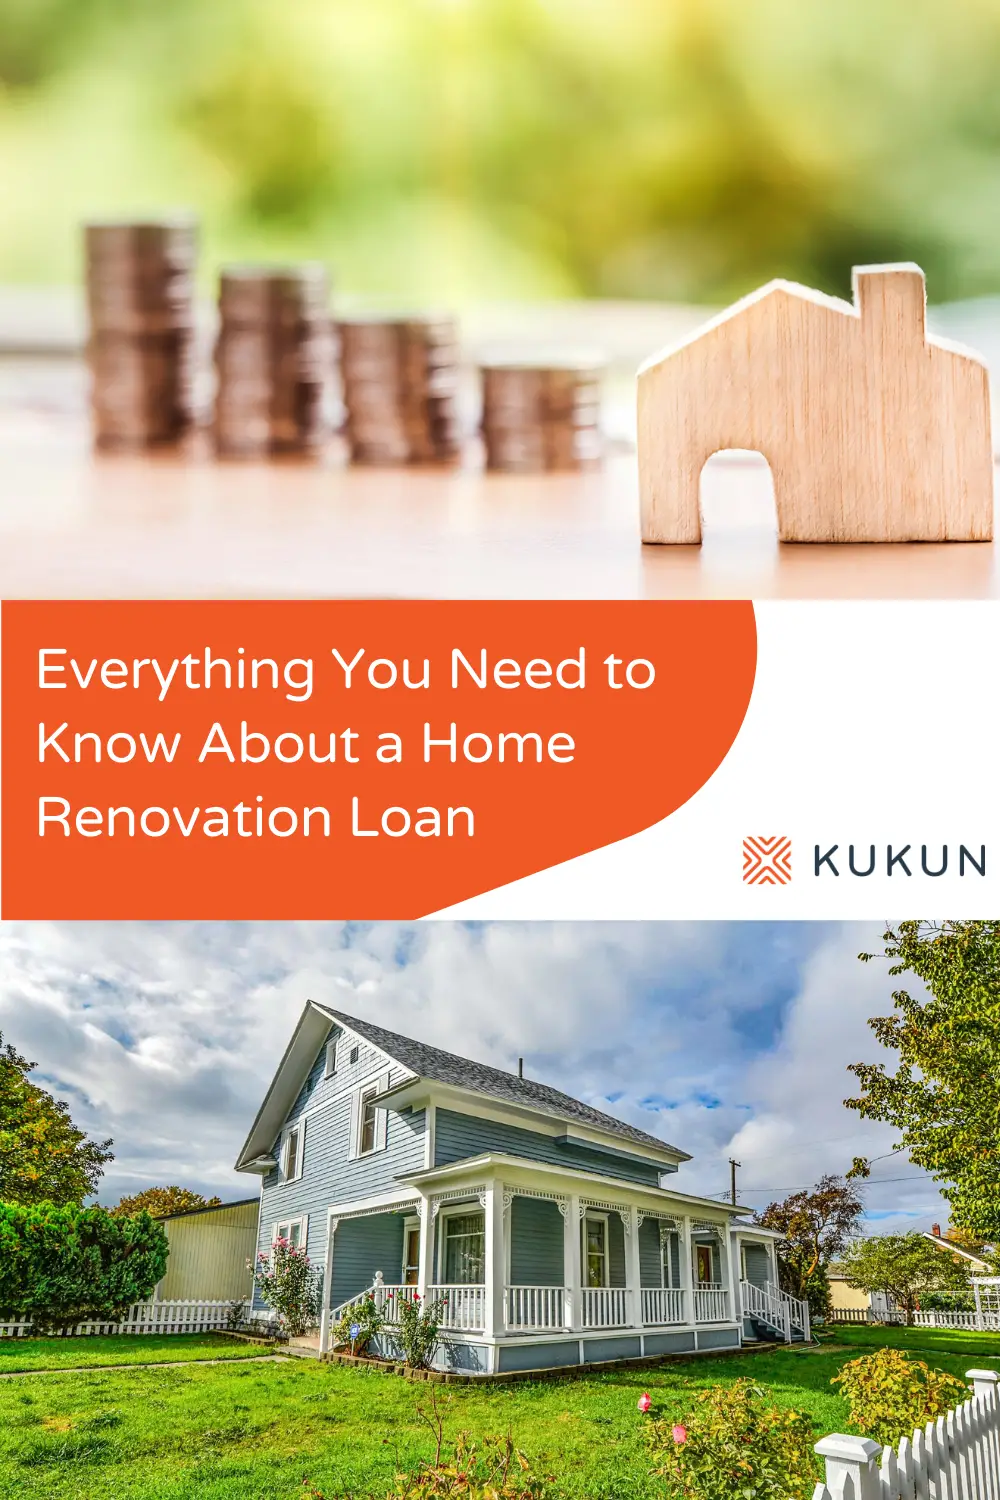 What Type Of Loan Is Best For Home Improvements